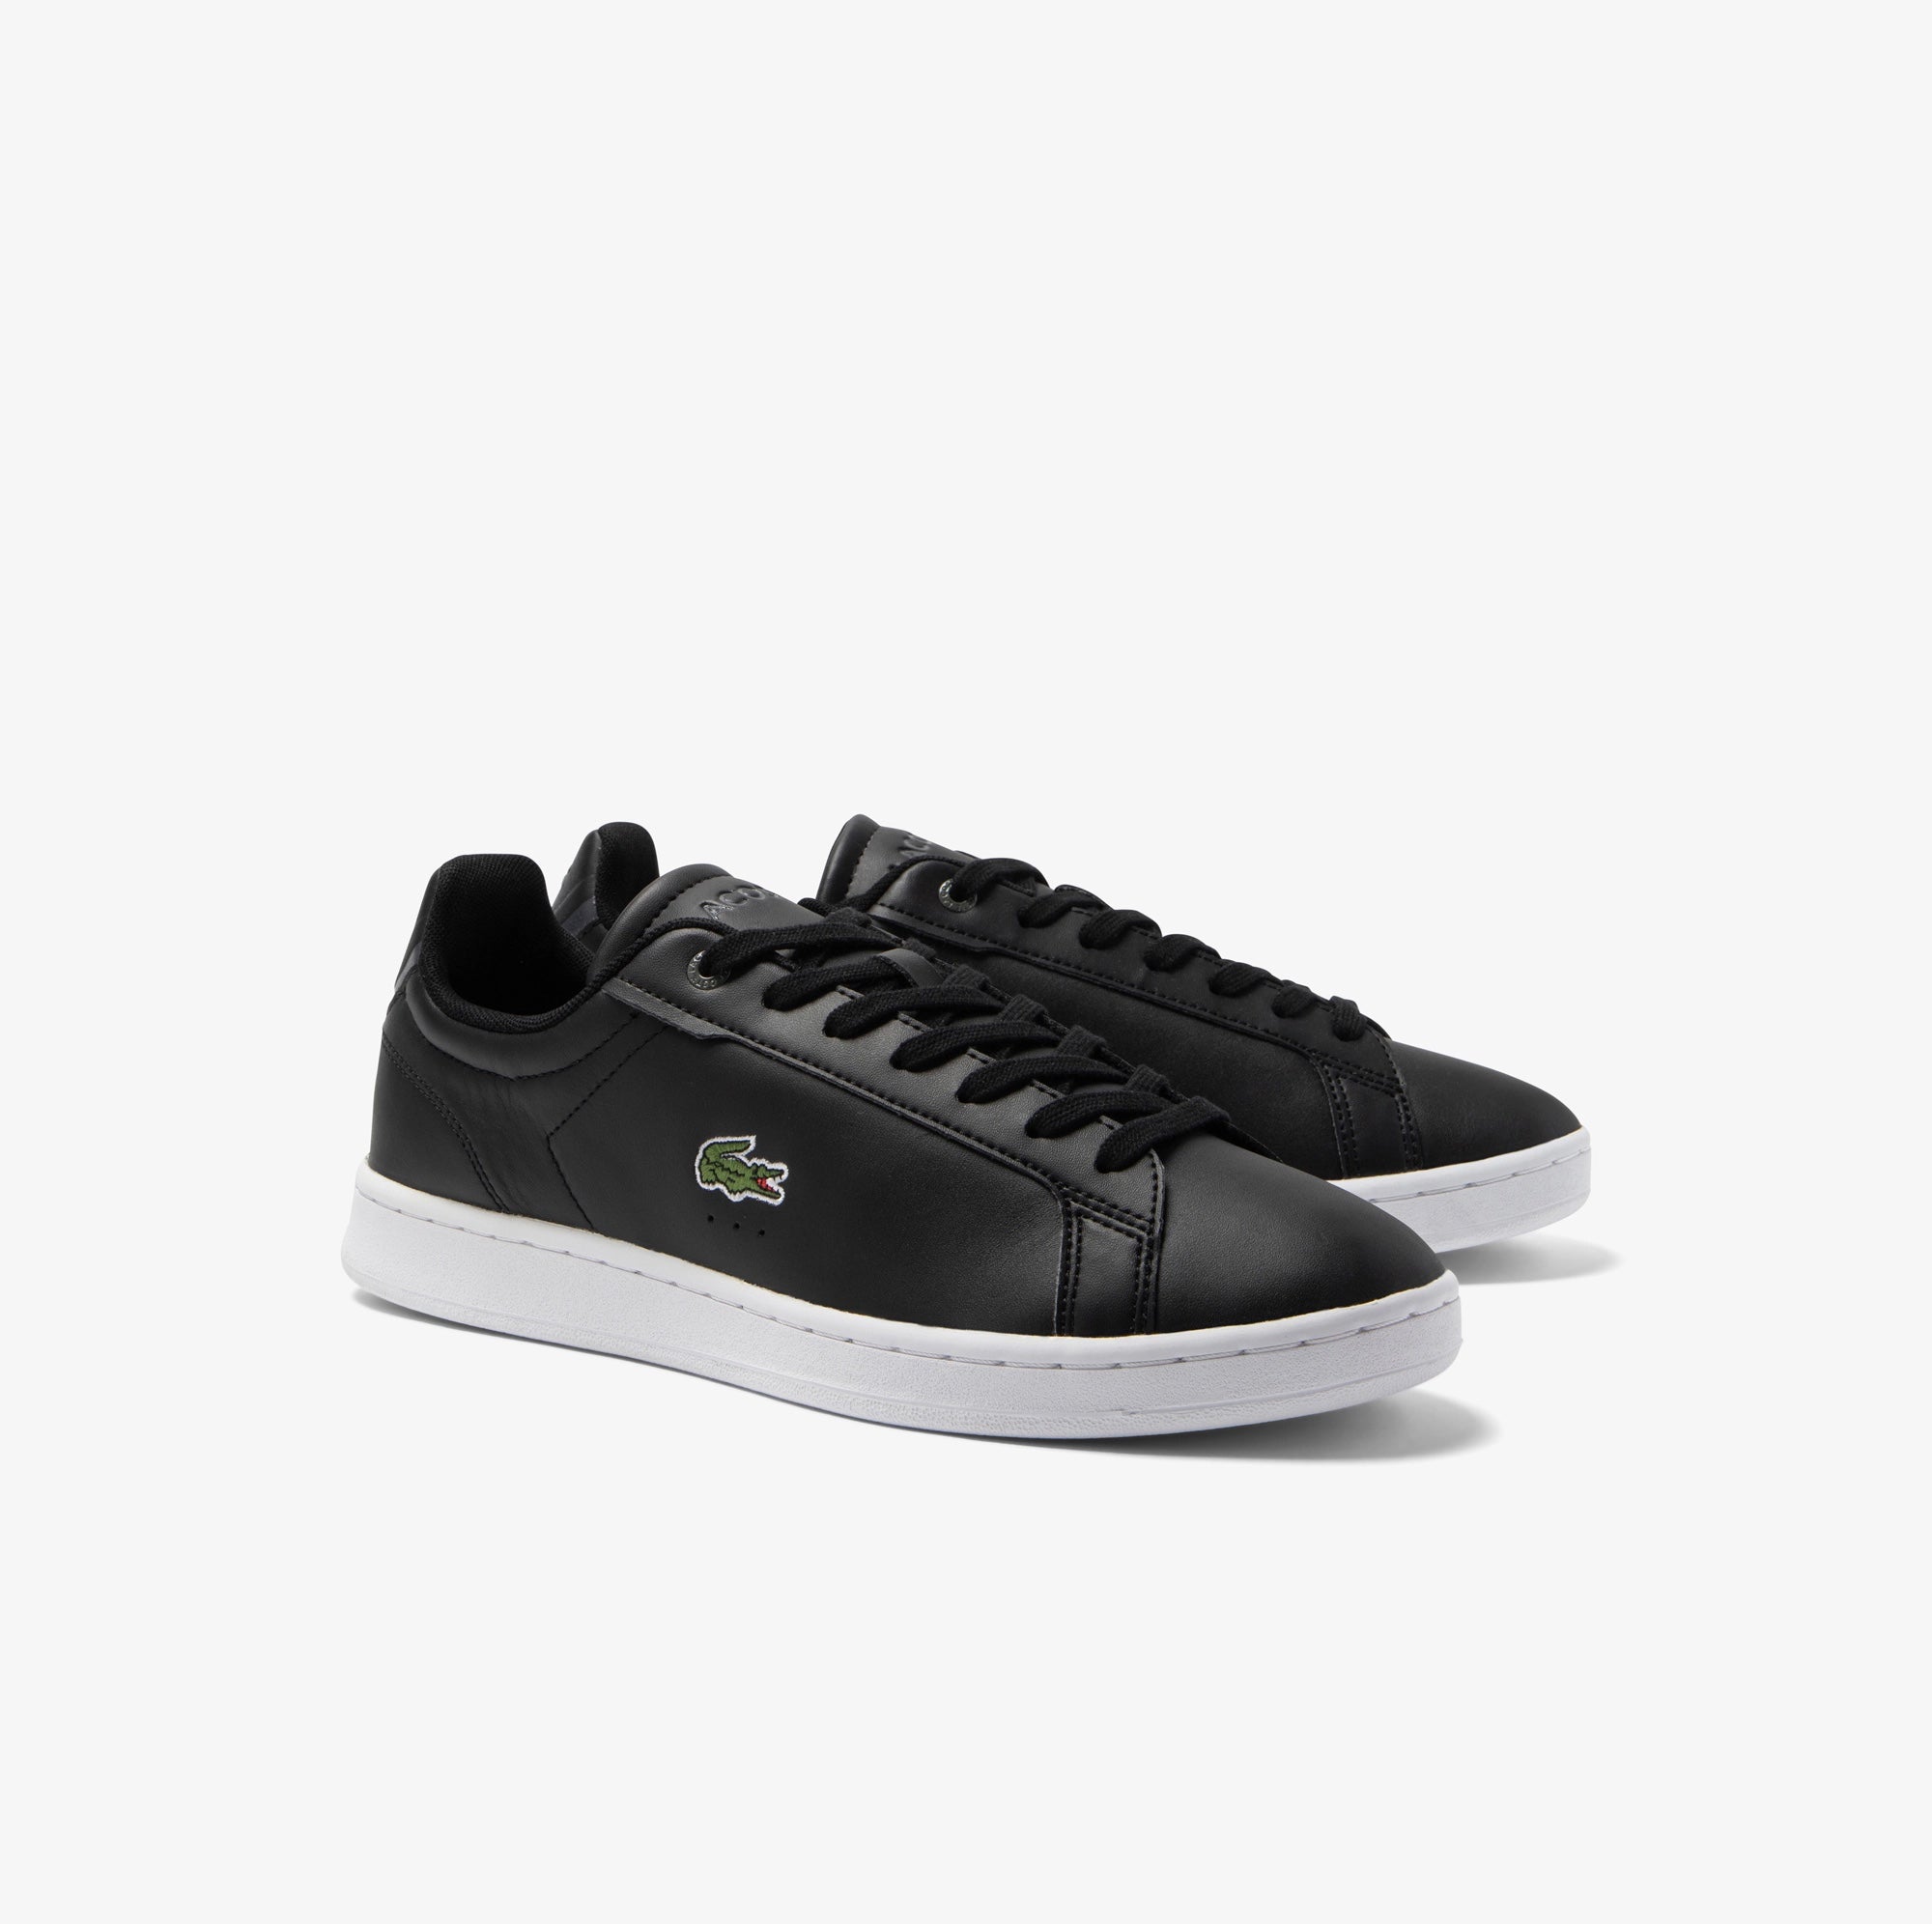 Carnaby Pro BL Leather Tonal Sneakers Black/White